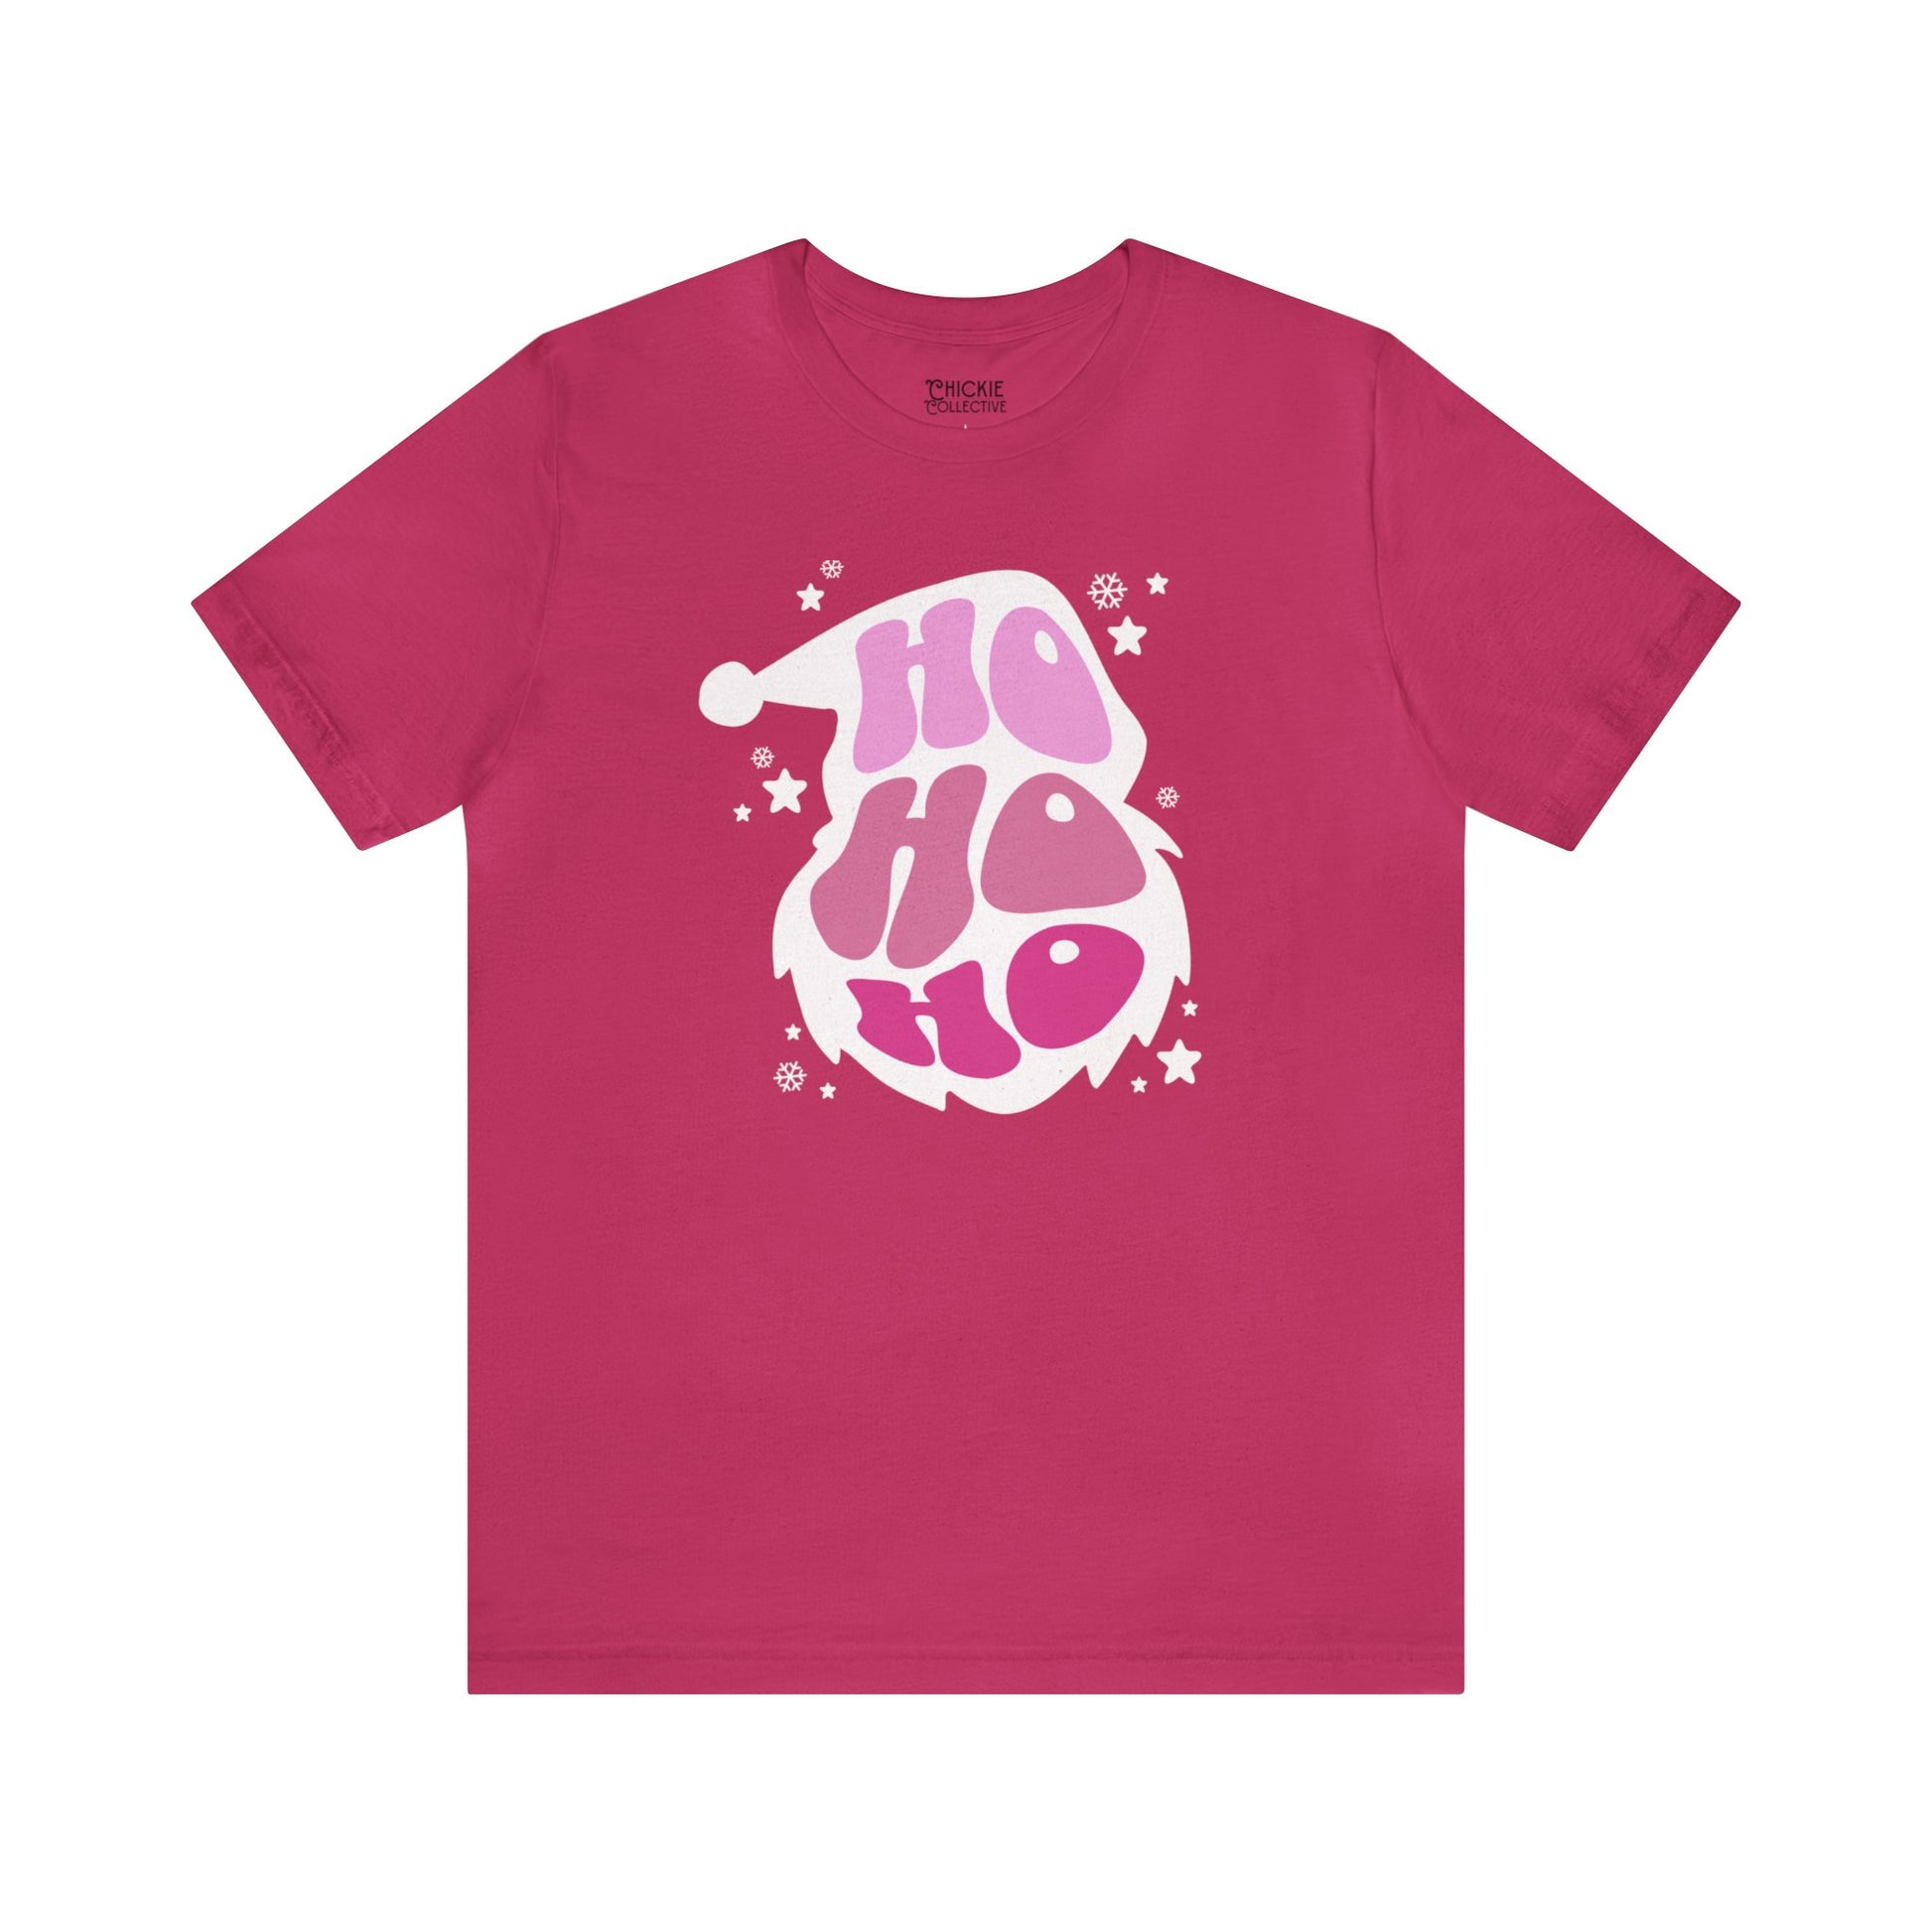 A lightweight Unisex Jersey Short Sleeve Tee featuring an image of Santa Claus, available in pink.